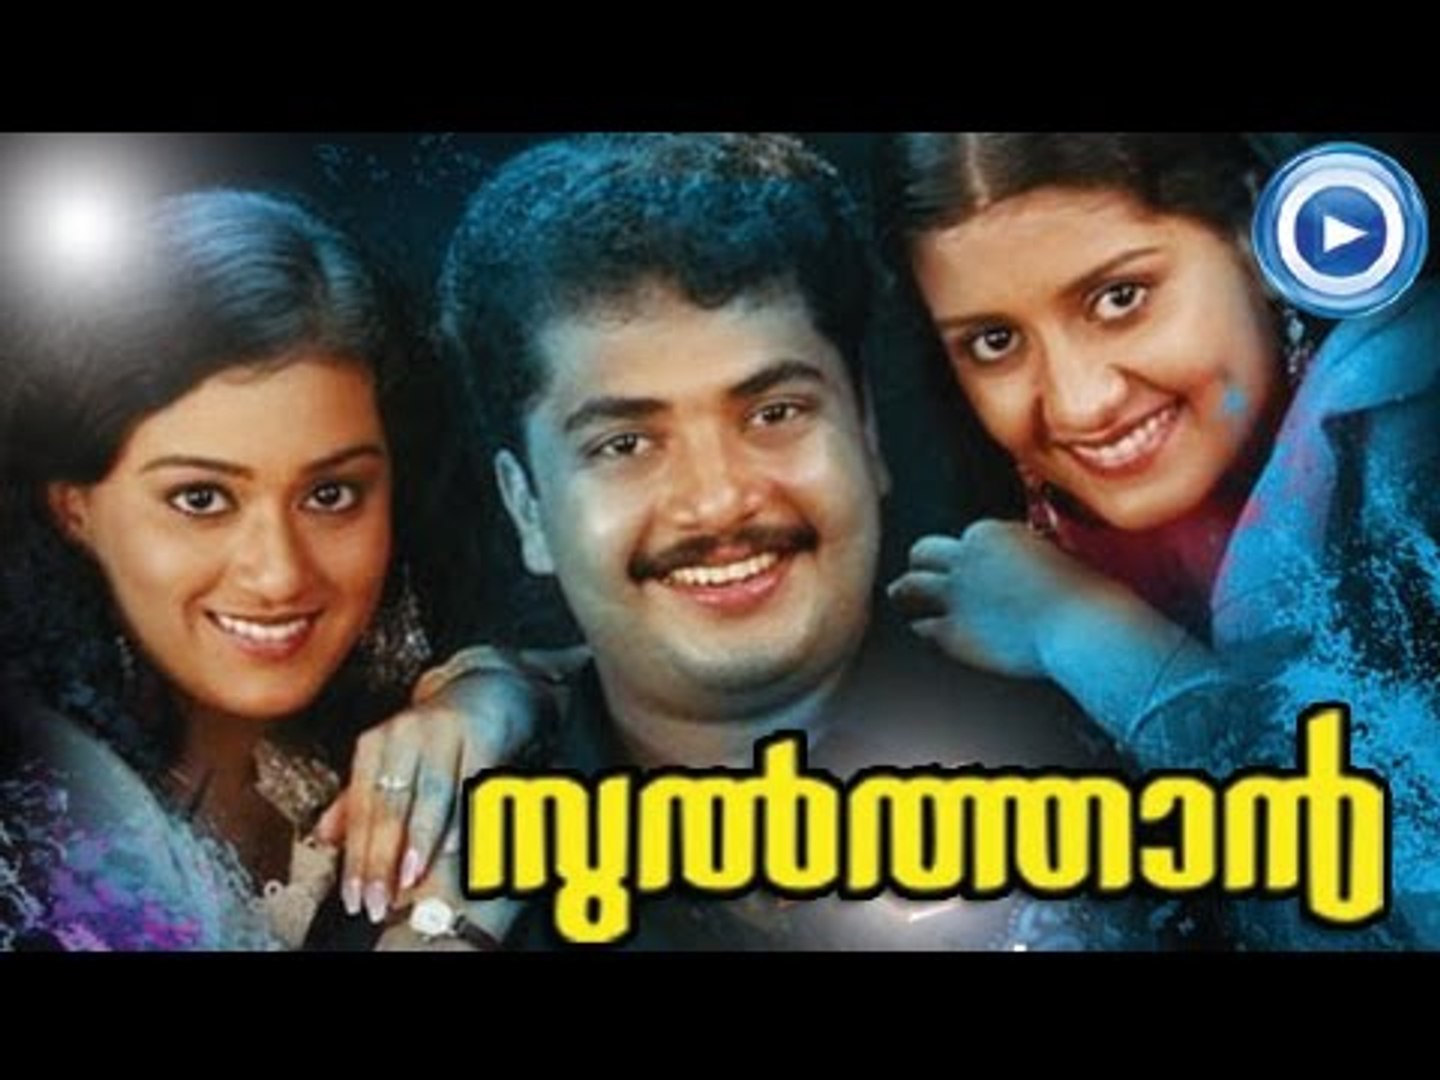 Sulthan full movie